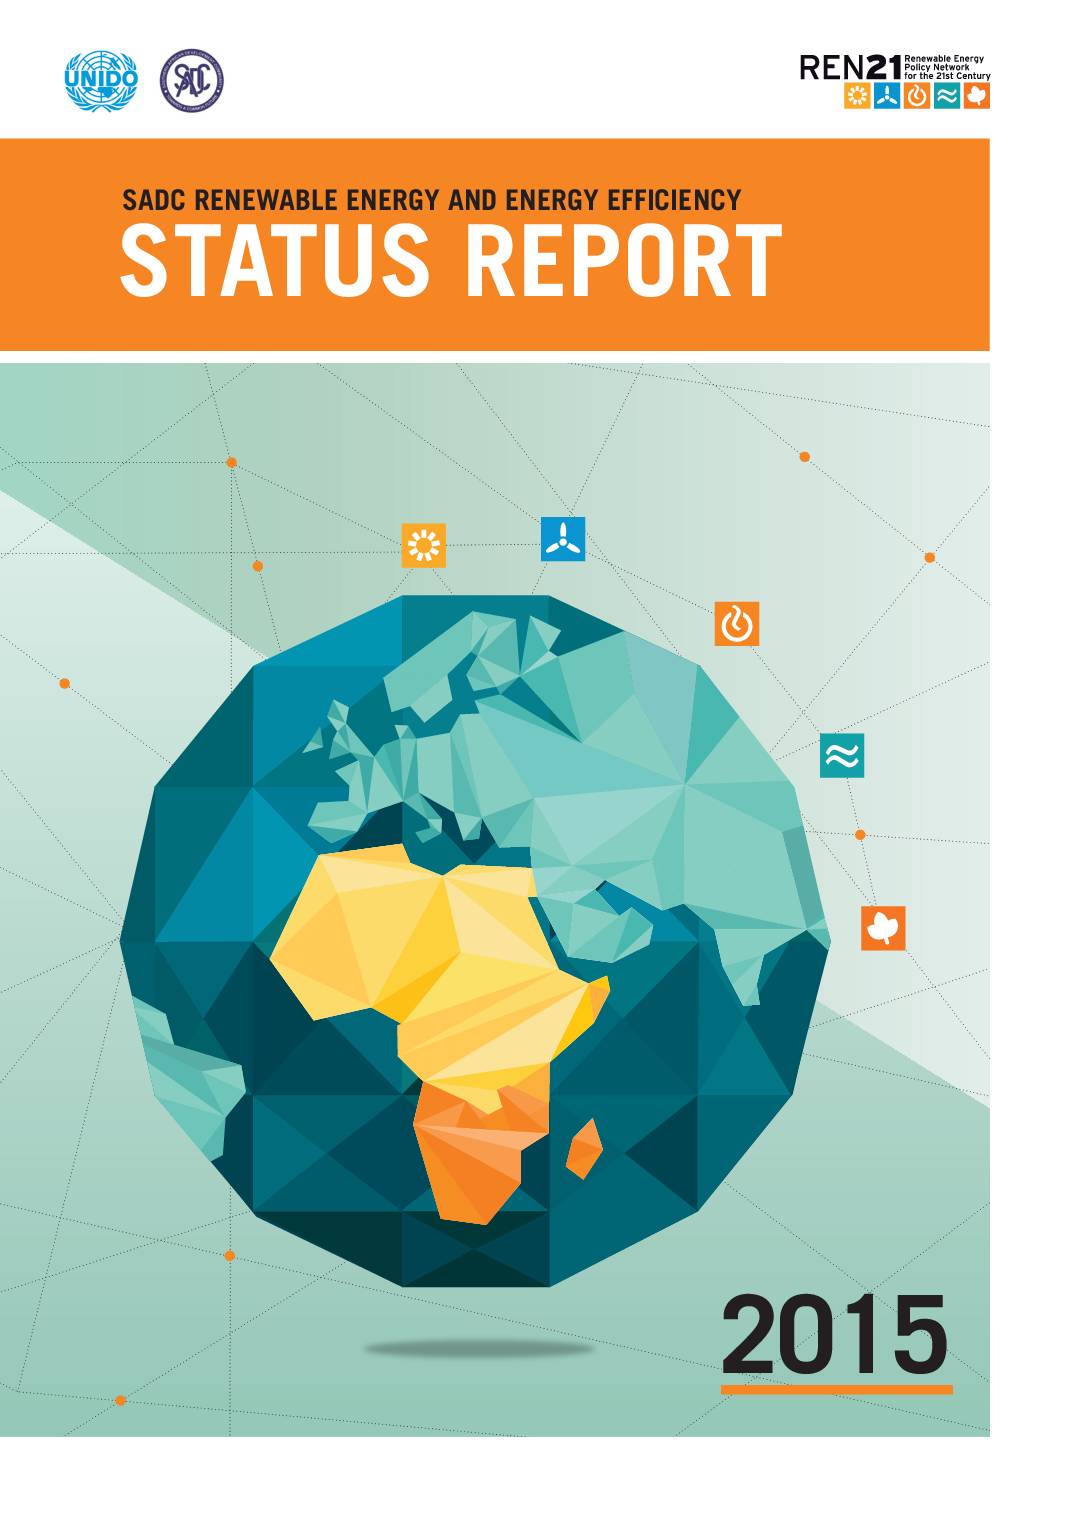 Renewable Energy and Energy Efficiency Status Report – 2015 – South African Development Community (SADC)